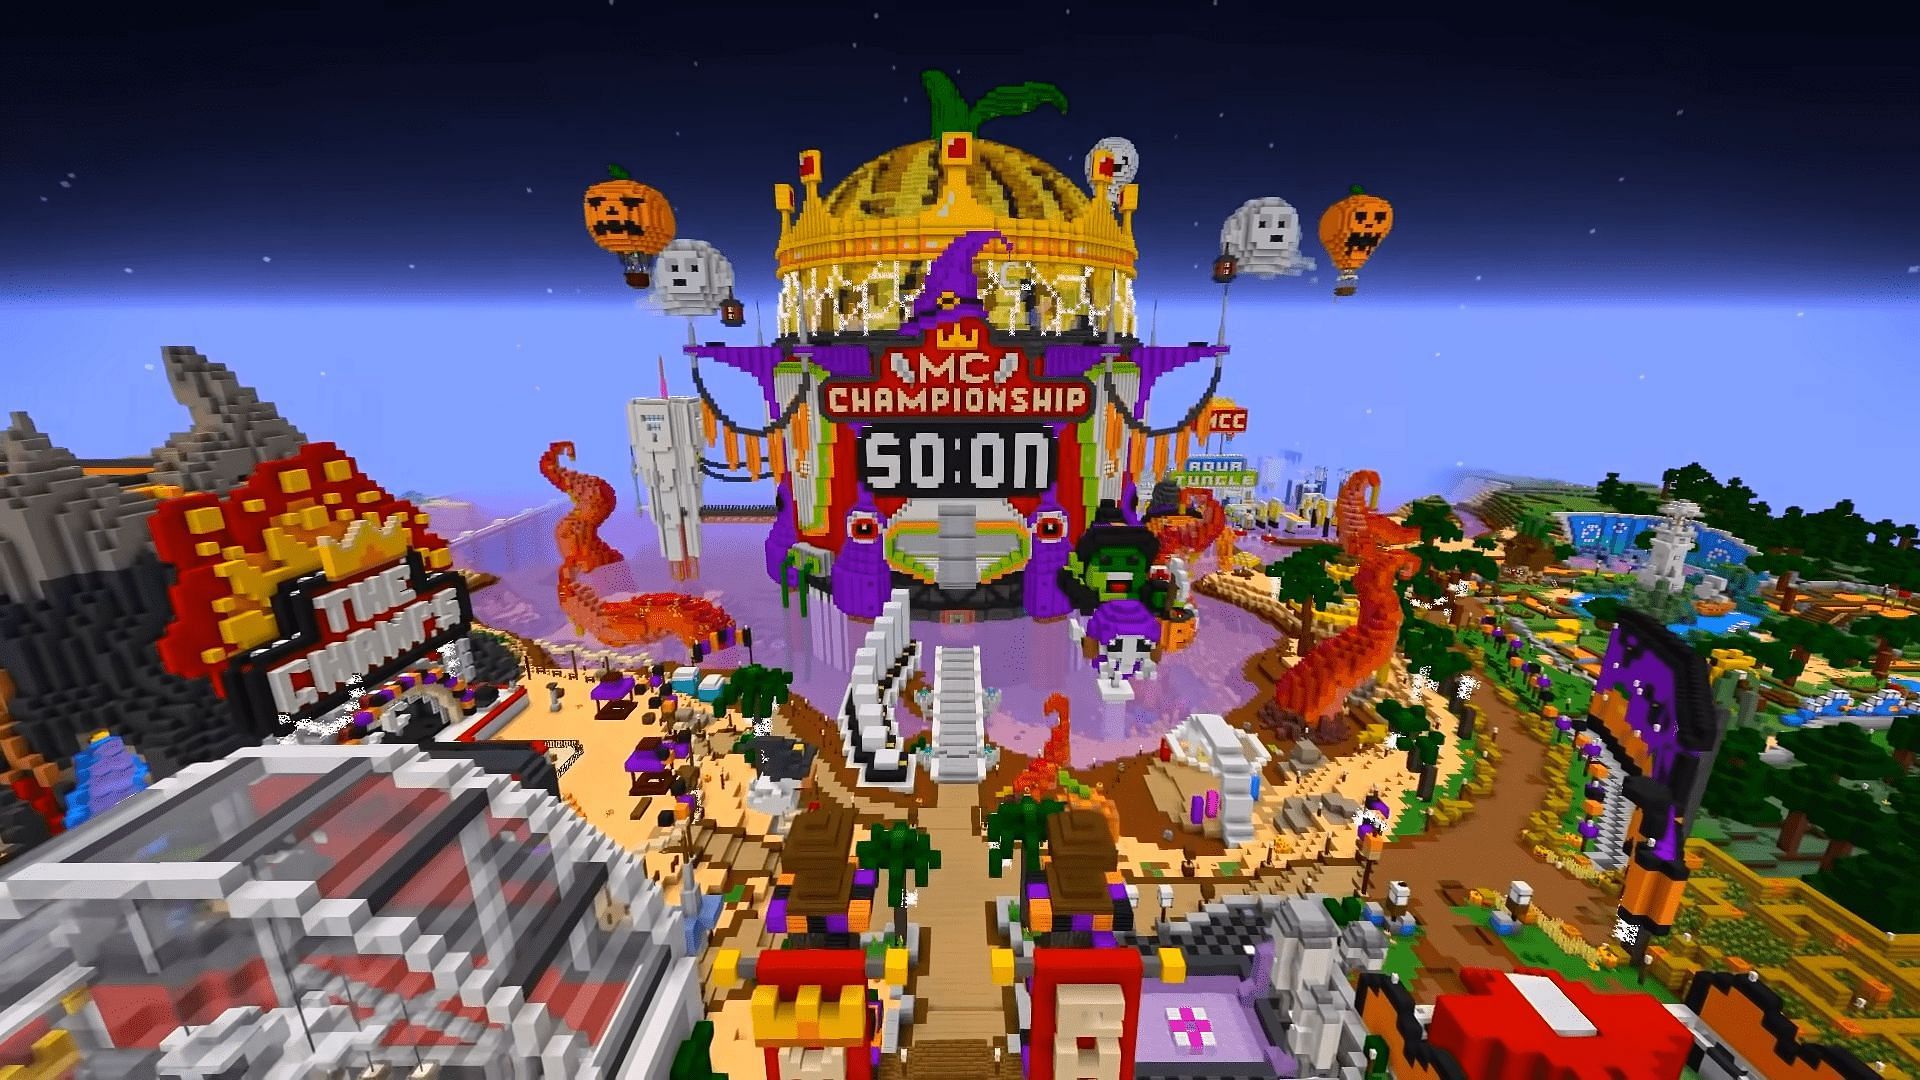 Minecraft Championships 26 took on the spooky appearance of Halloween